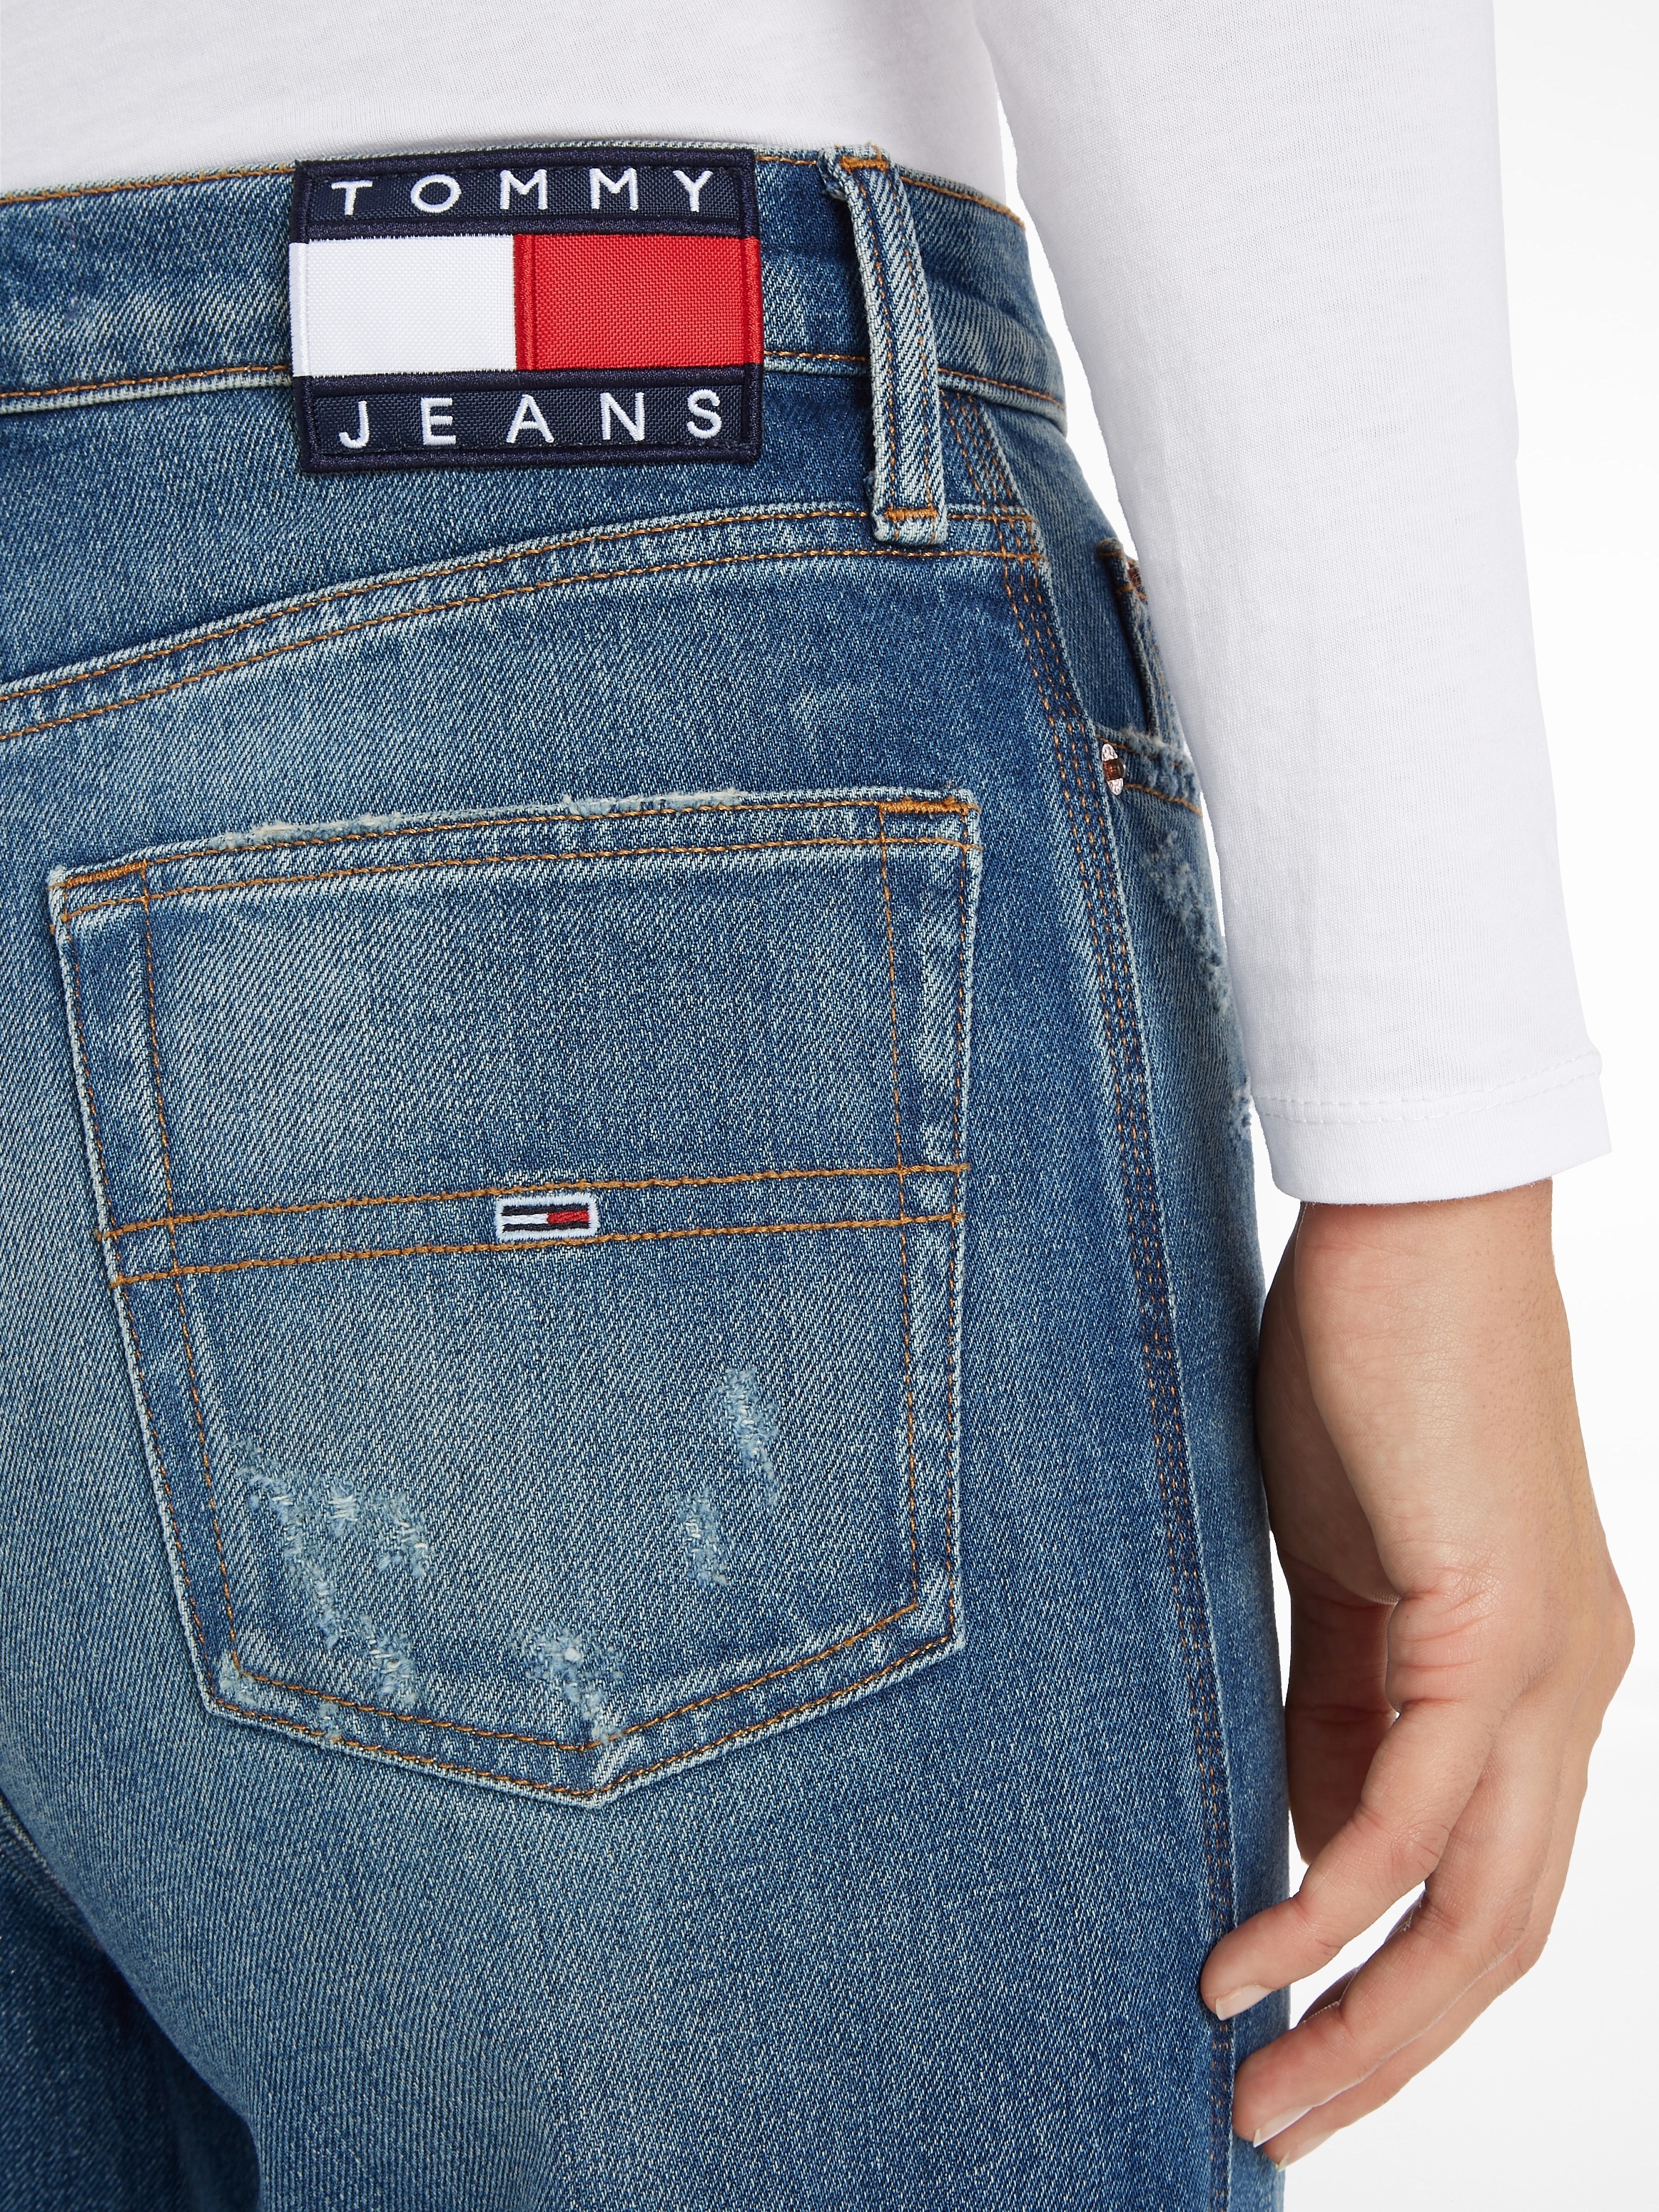 Tommy Jeans Weite Jeans, mit Tommy Jeans Logobadges bei ♕